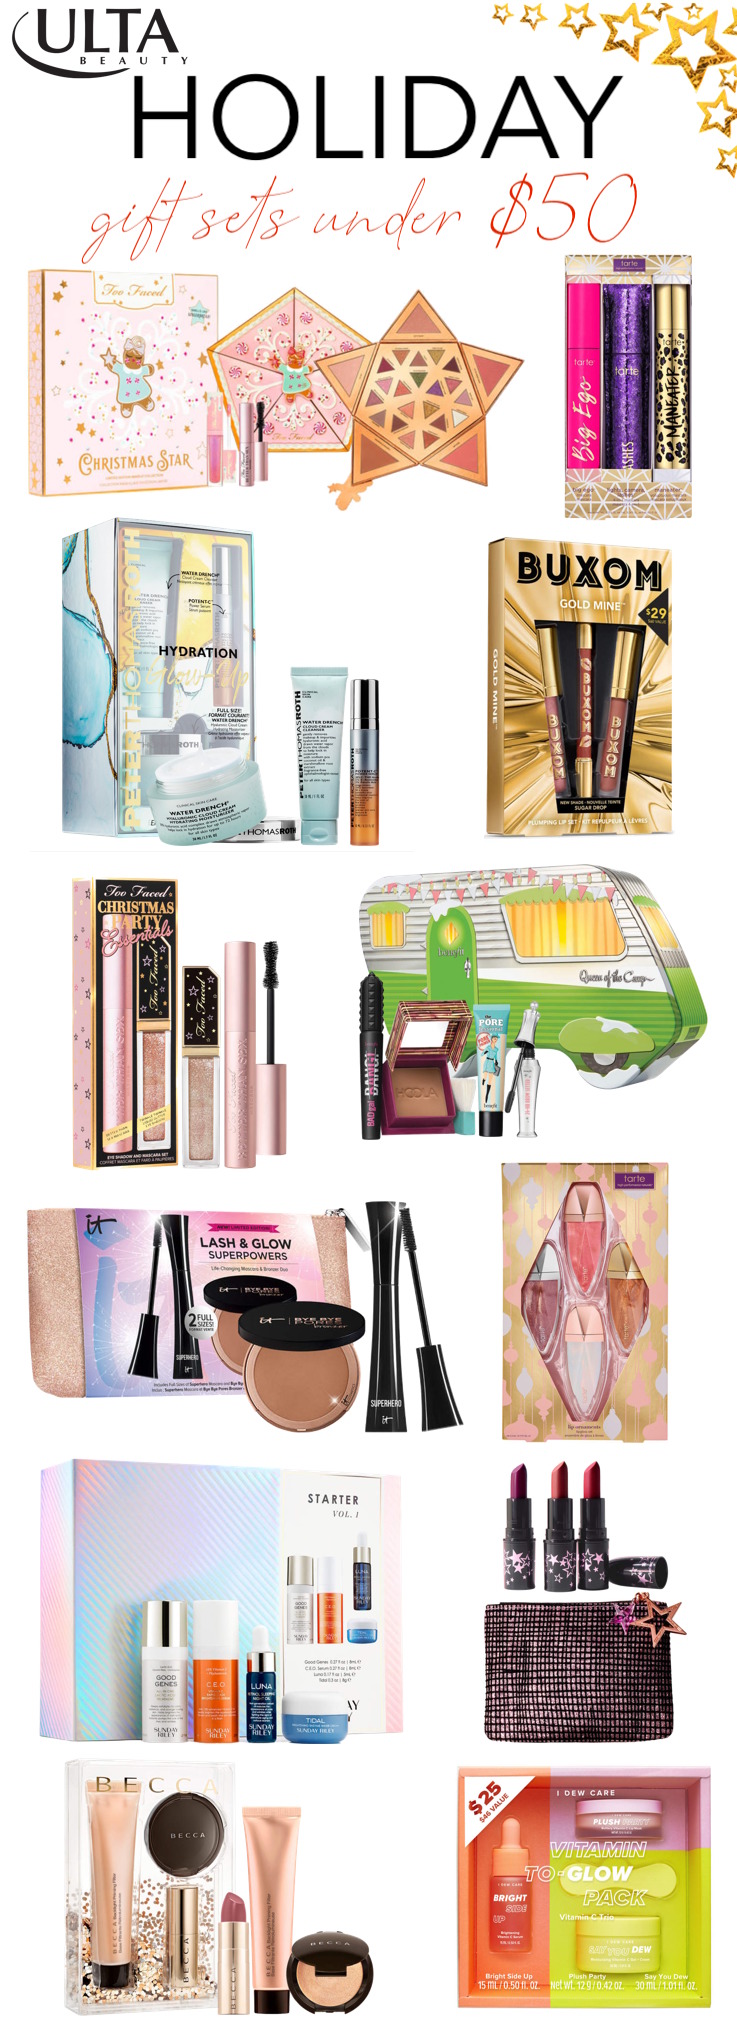 The Best Ulta Holiday 2019 Sets Under $50! Click through to see the full list #ultagiftsets #holidaygiftideas #beautygifts #holidays2019 #makeupgifts #holidaygift #beautygiftsets 